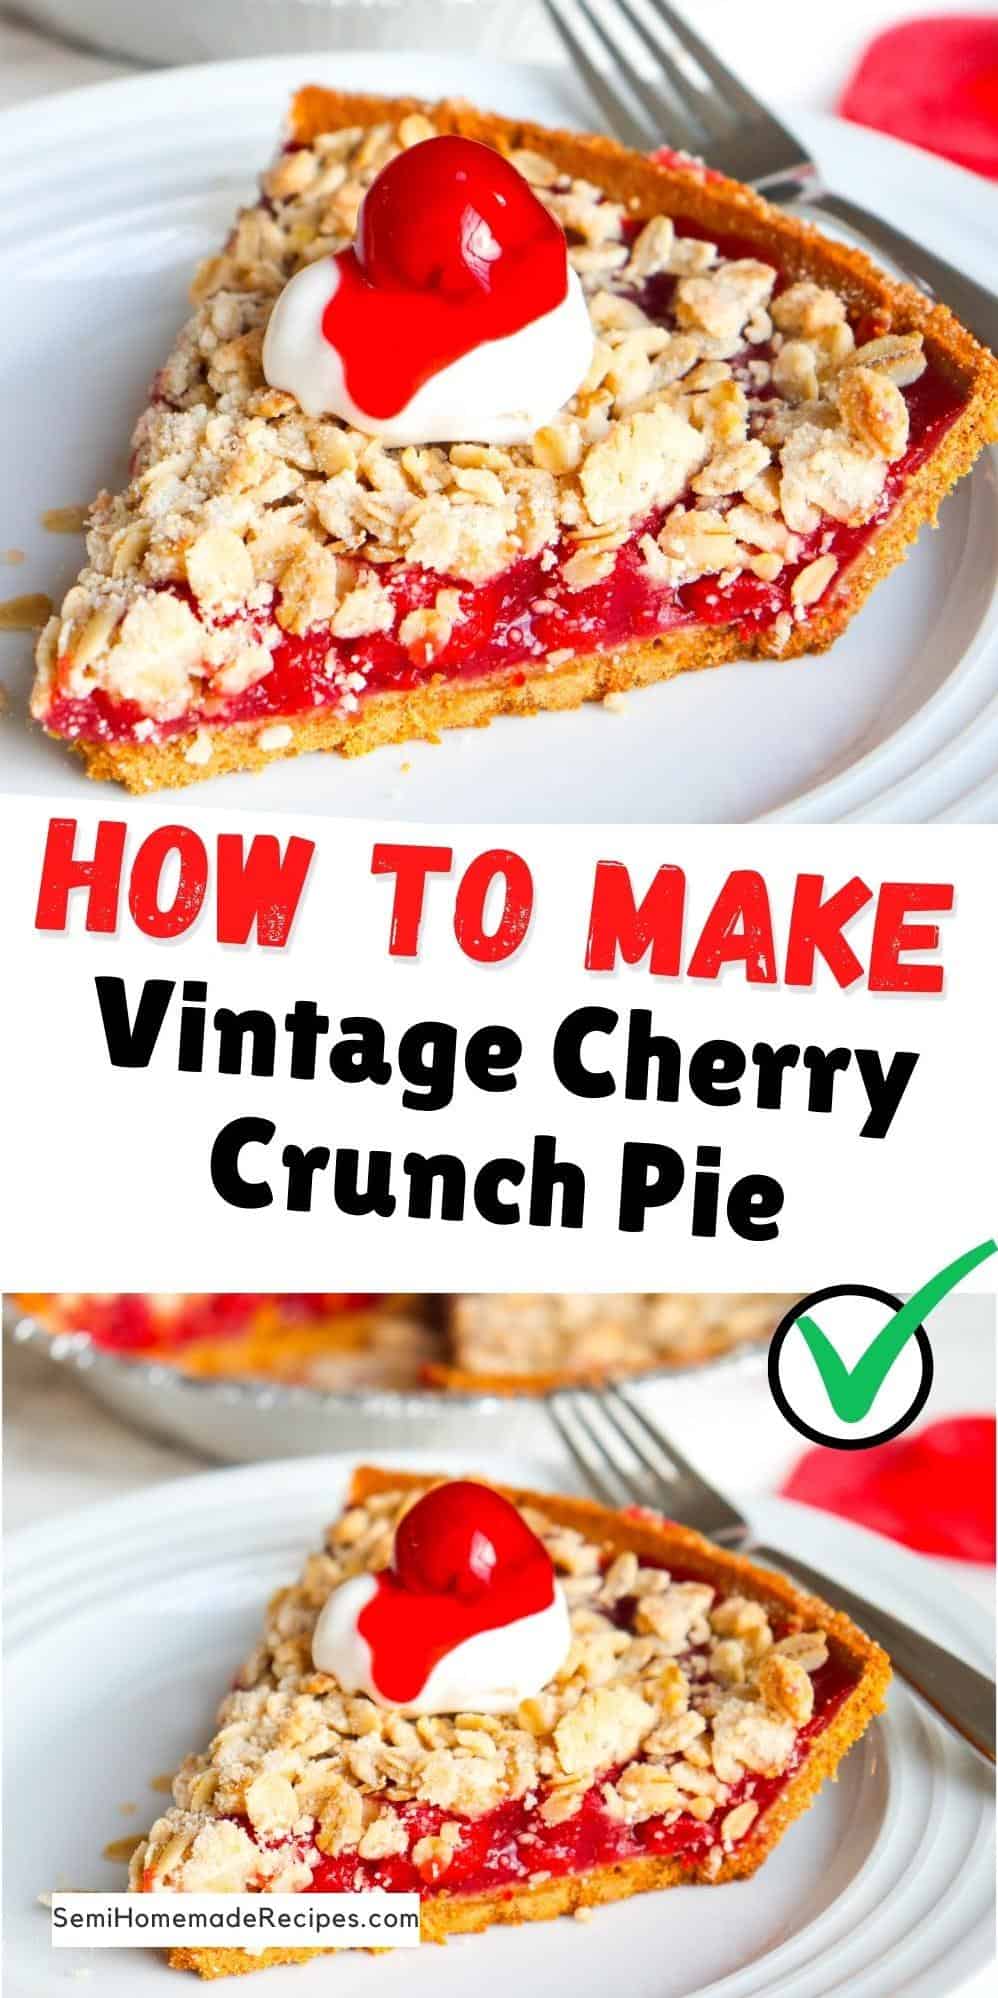  This pie is bursting with juicy cherry goodness!